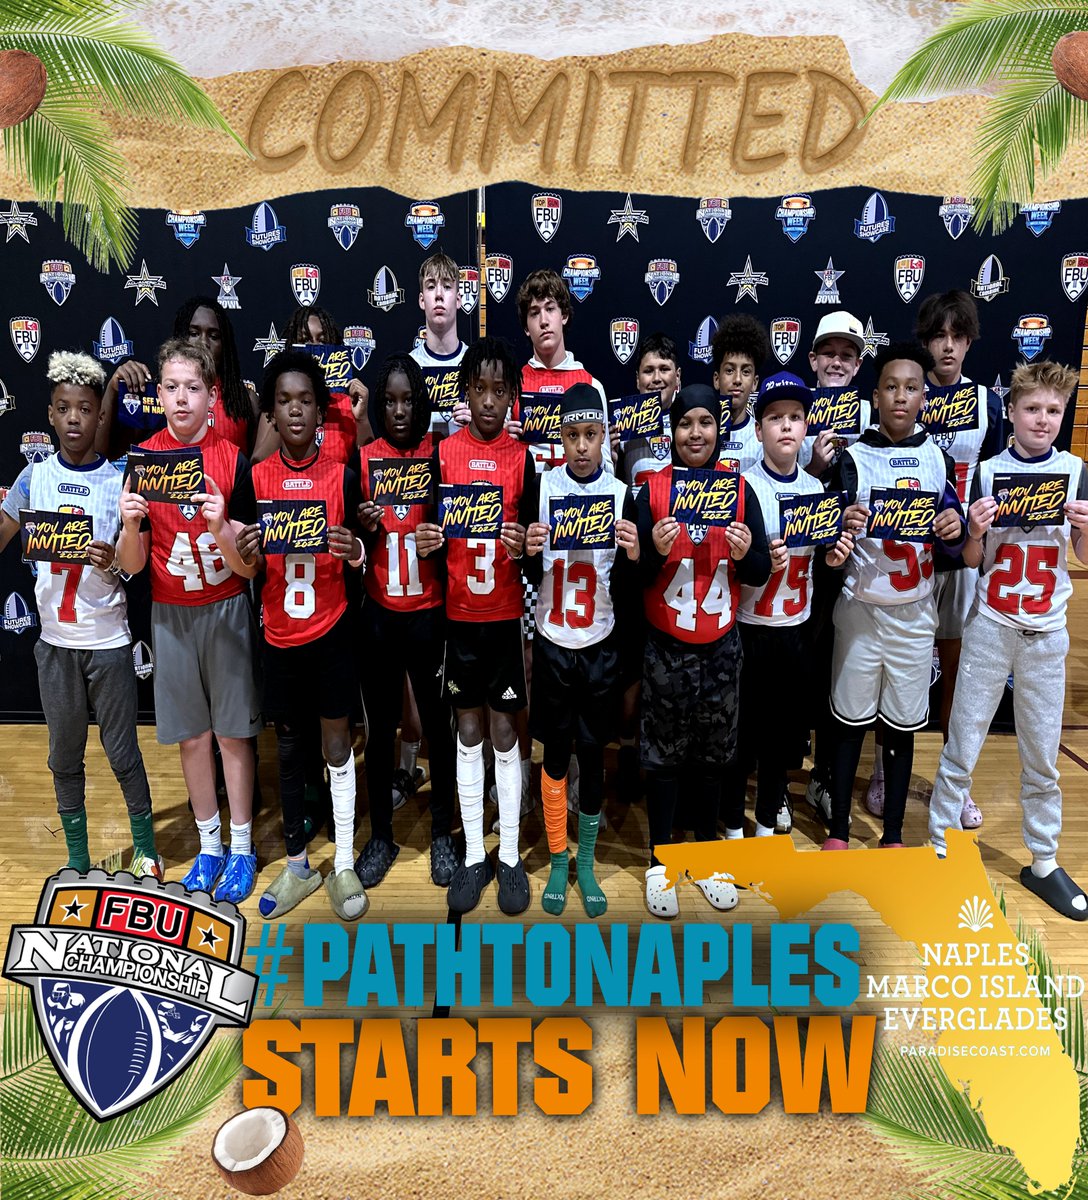 #PATHTONAPLES Congrats on being selected to play for FBU Team Illinois in the 2024 FBU National Championship 👏👏 #FBUNC #NationalChampionship